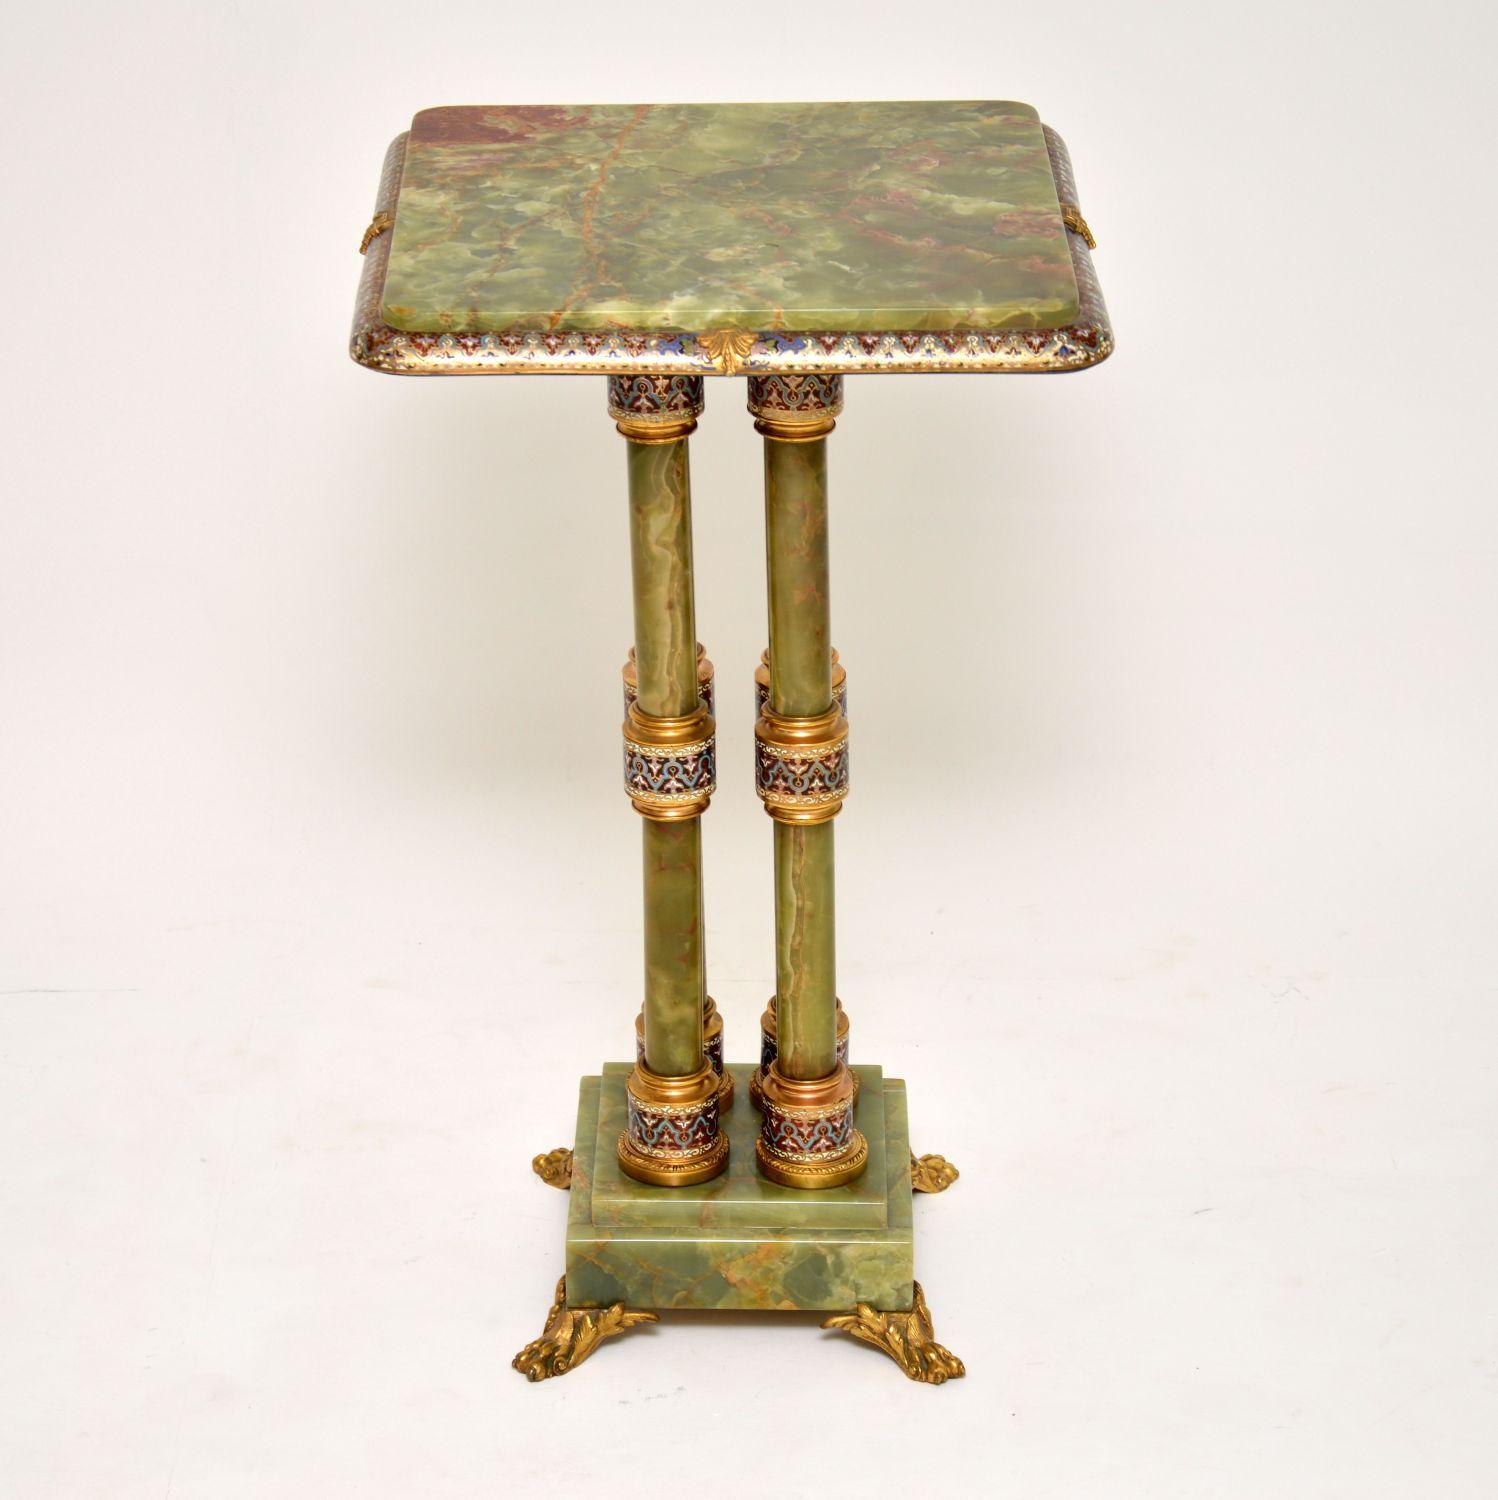 This antique French champlevé enamel cloisonné onyx and gilt bronze table stand is an absolutely stunning and rare item. Please enlarge all the images to appreciate all the work involved, especially within the colourful details. It’s in excellent